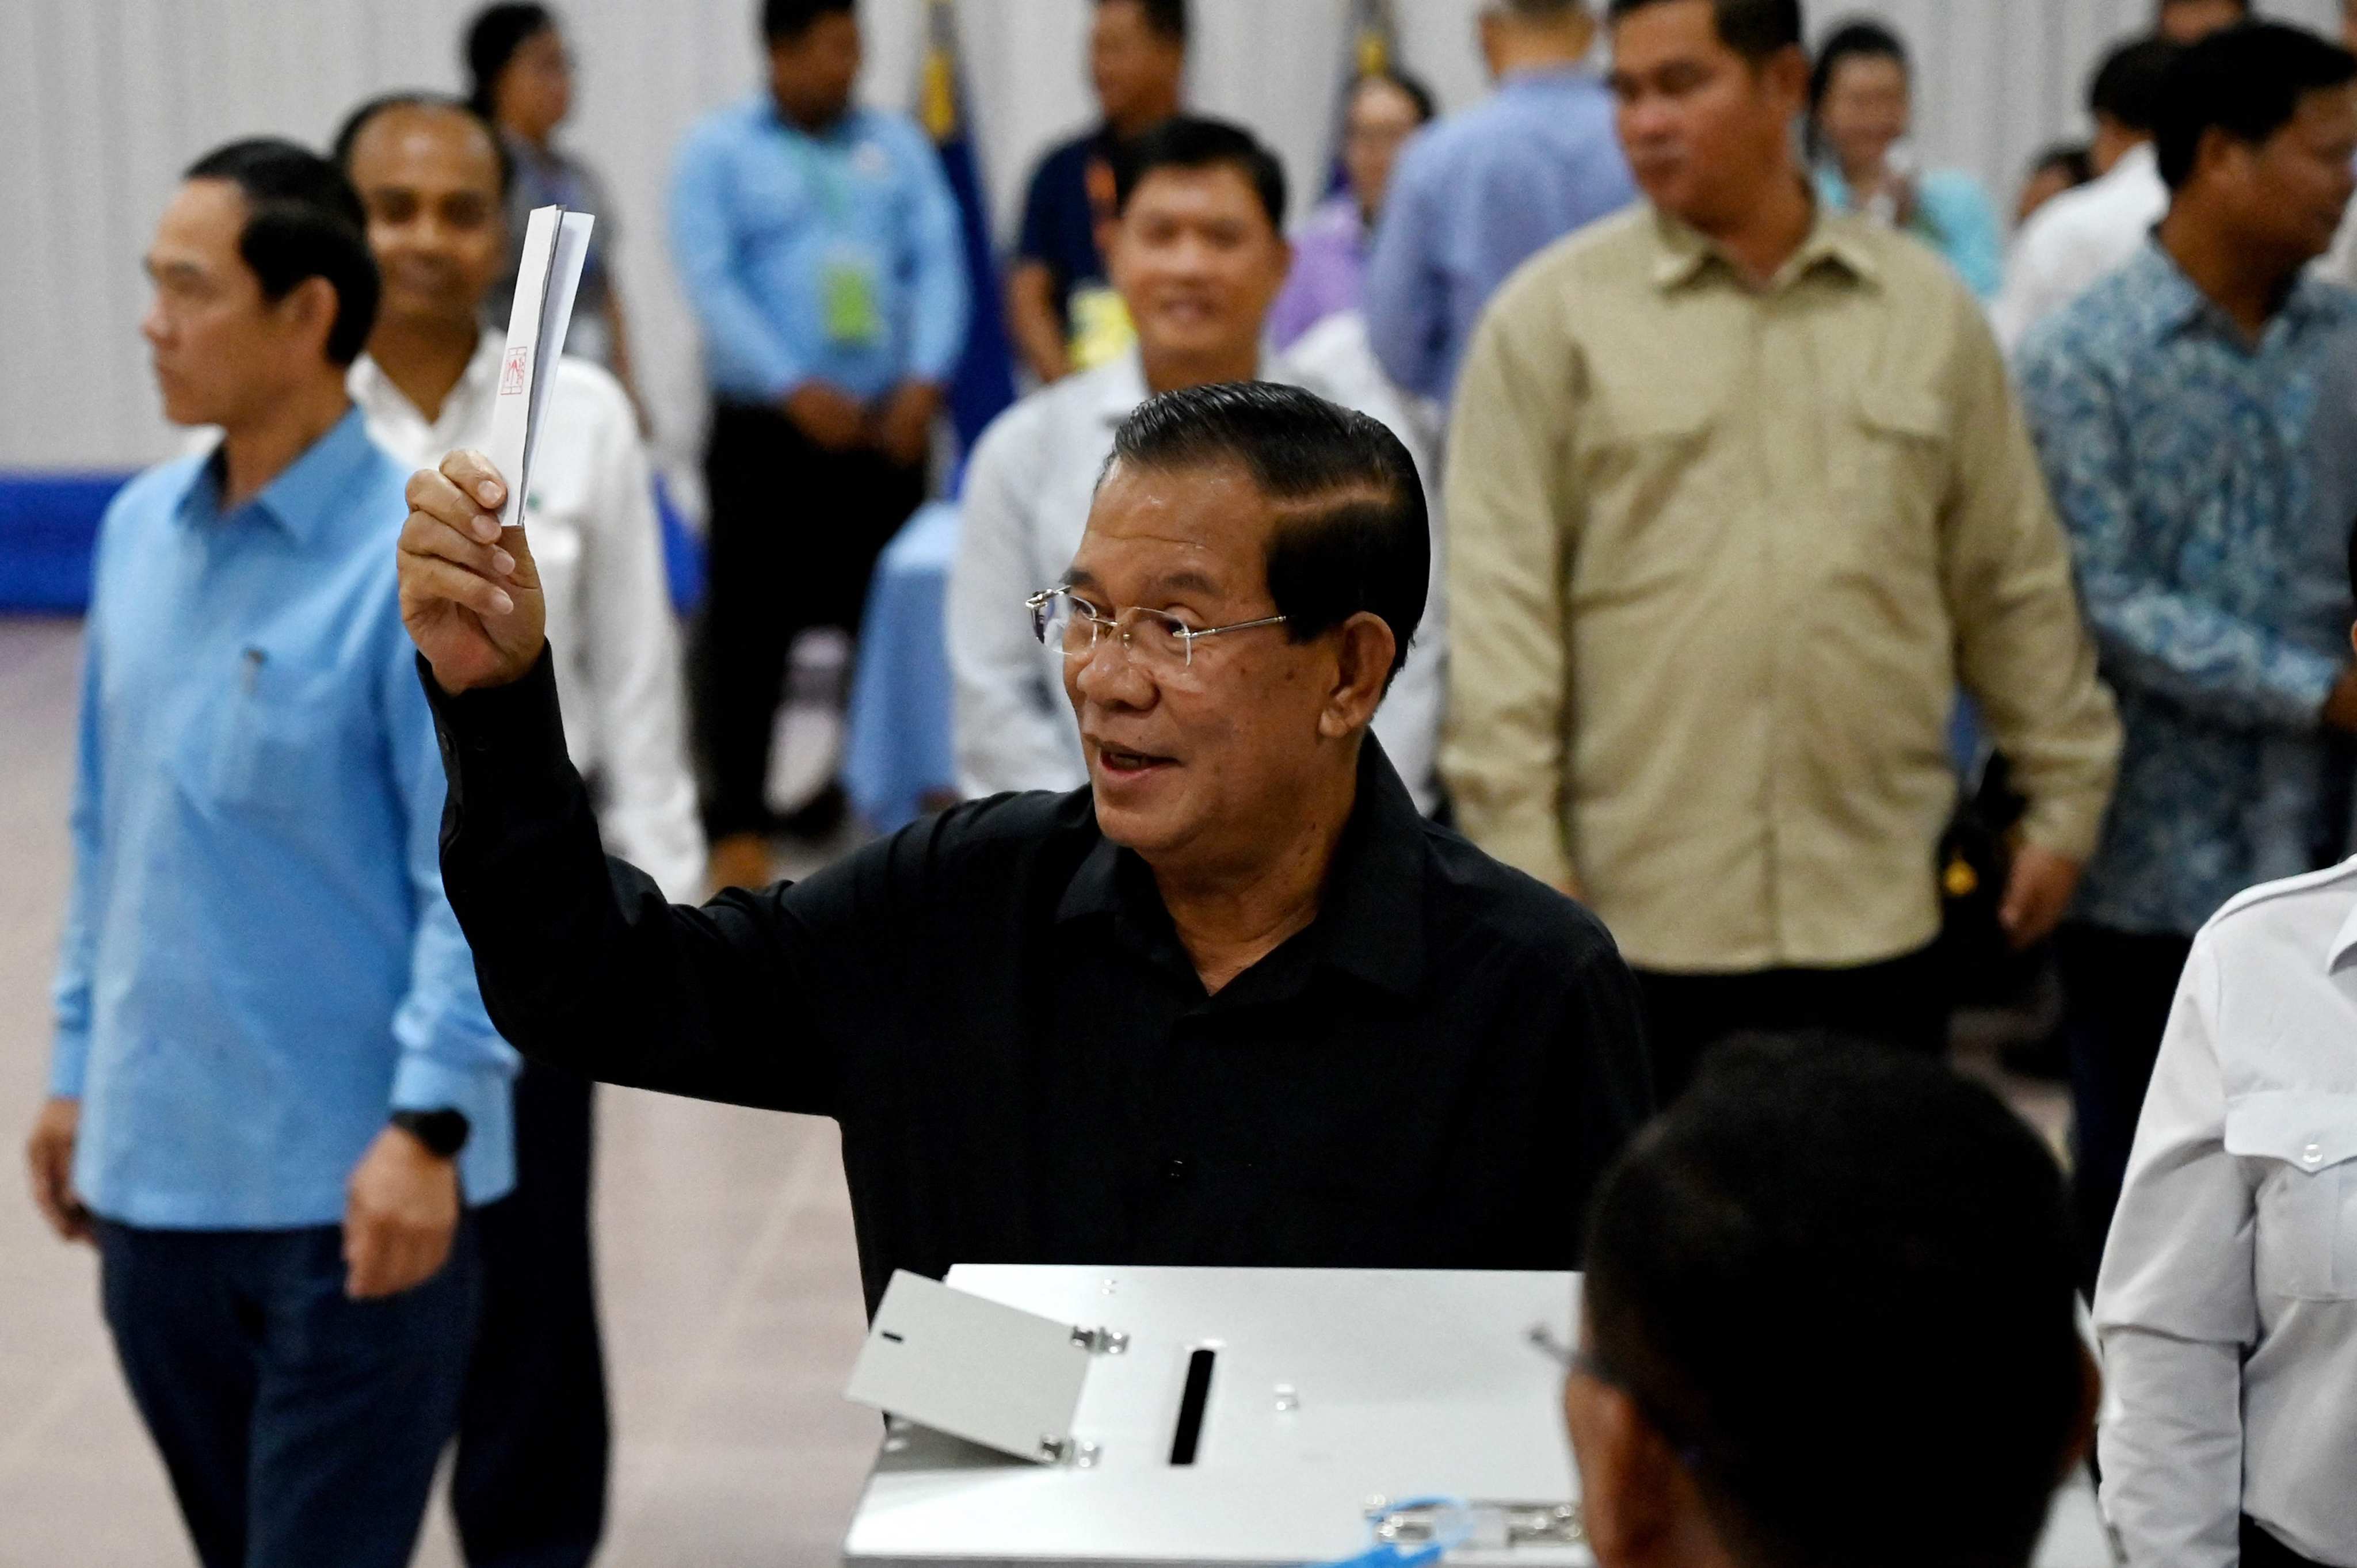 Former Prime Minister Hun Sen shows a ballot paper as he votes at a polling station during the Senate election in Takhmao city, Kandal province, on Sunday. Photo: AFP